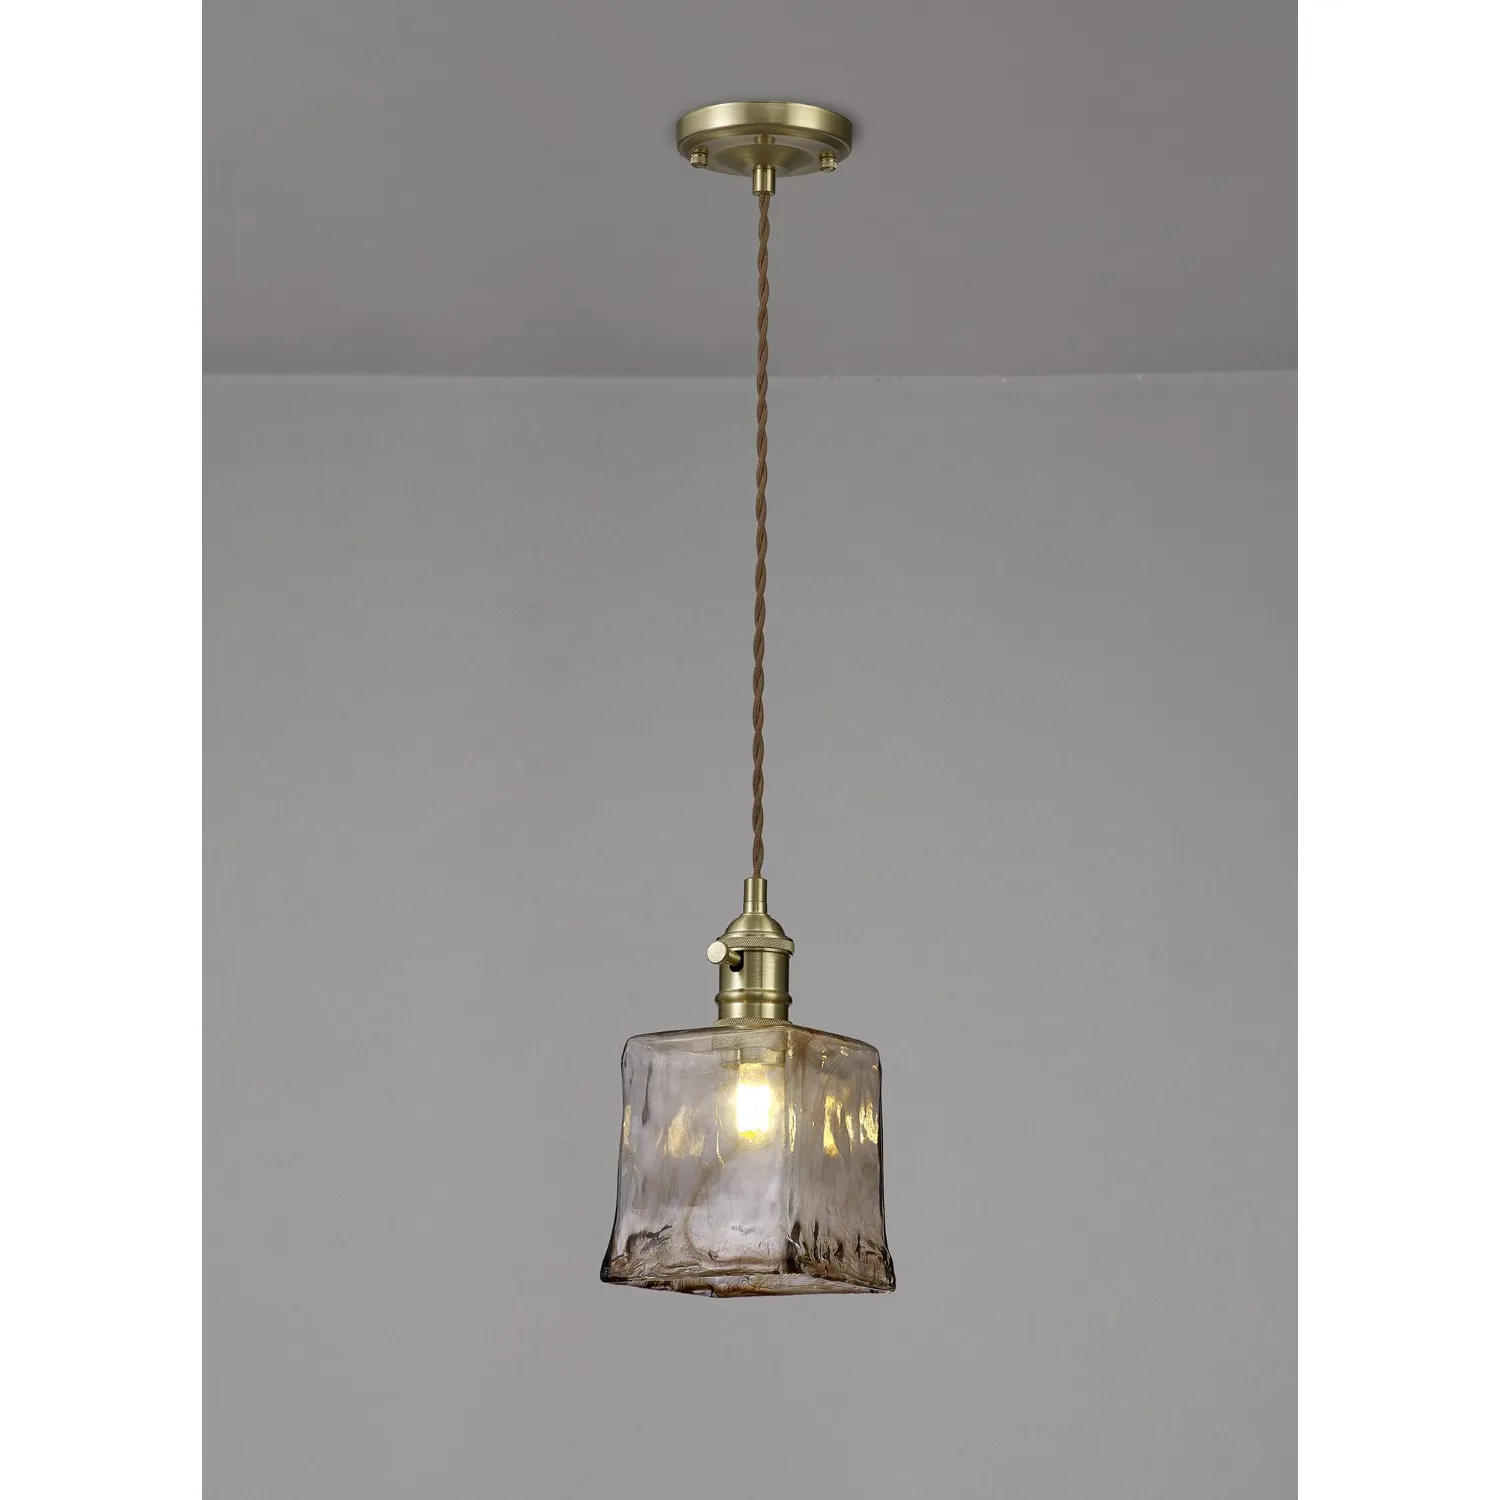 Hatfield Switched Pendant 1.5m, 1 x E27, Brass Pale Gold Twisted Cable Brown Square Glass